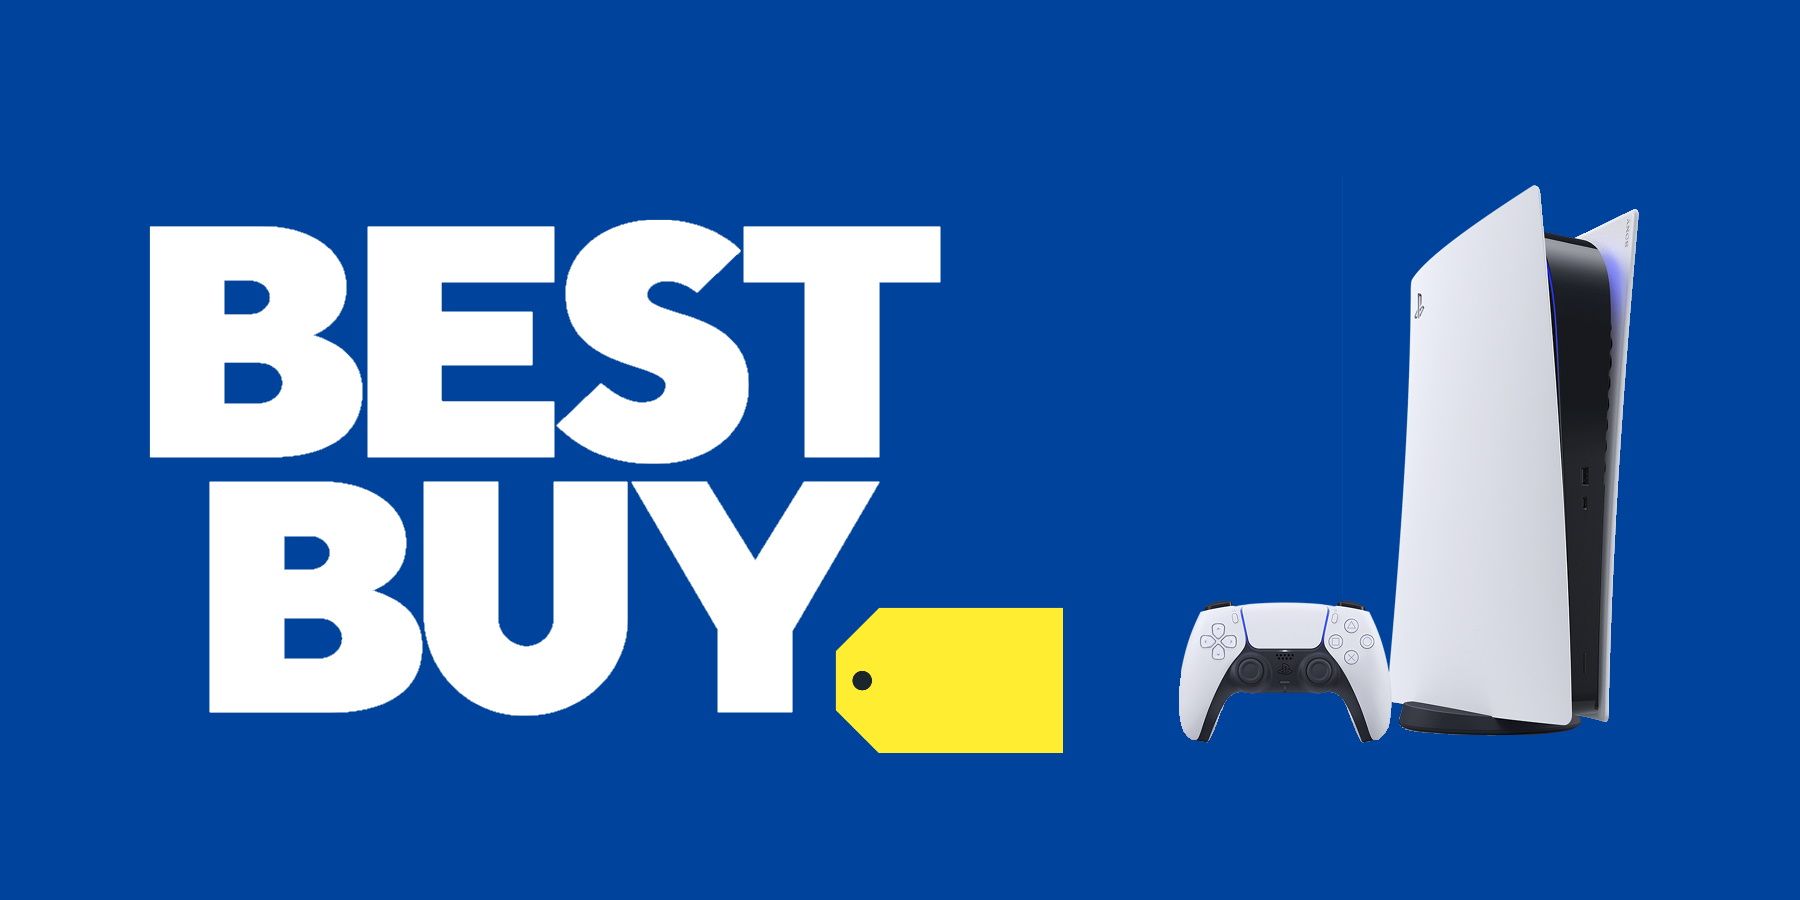 This is madness: Best Buy PS5 restock requires a $200 membership